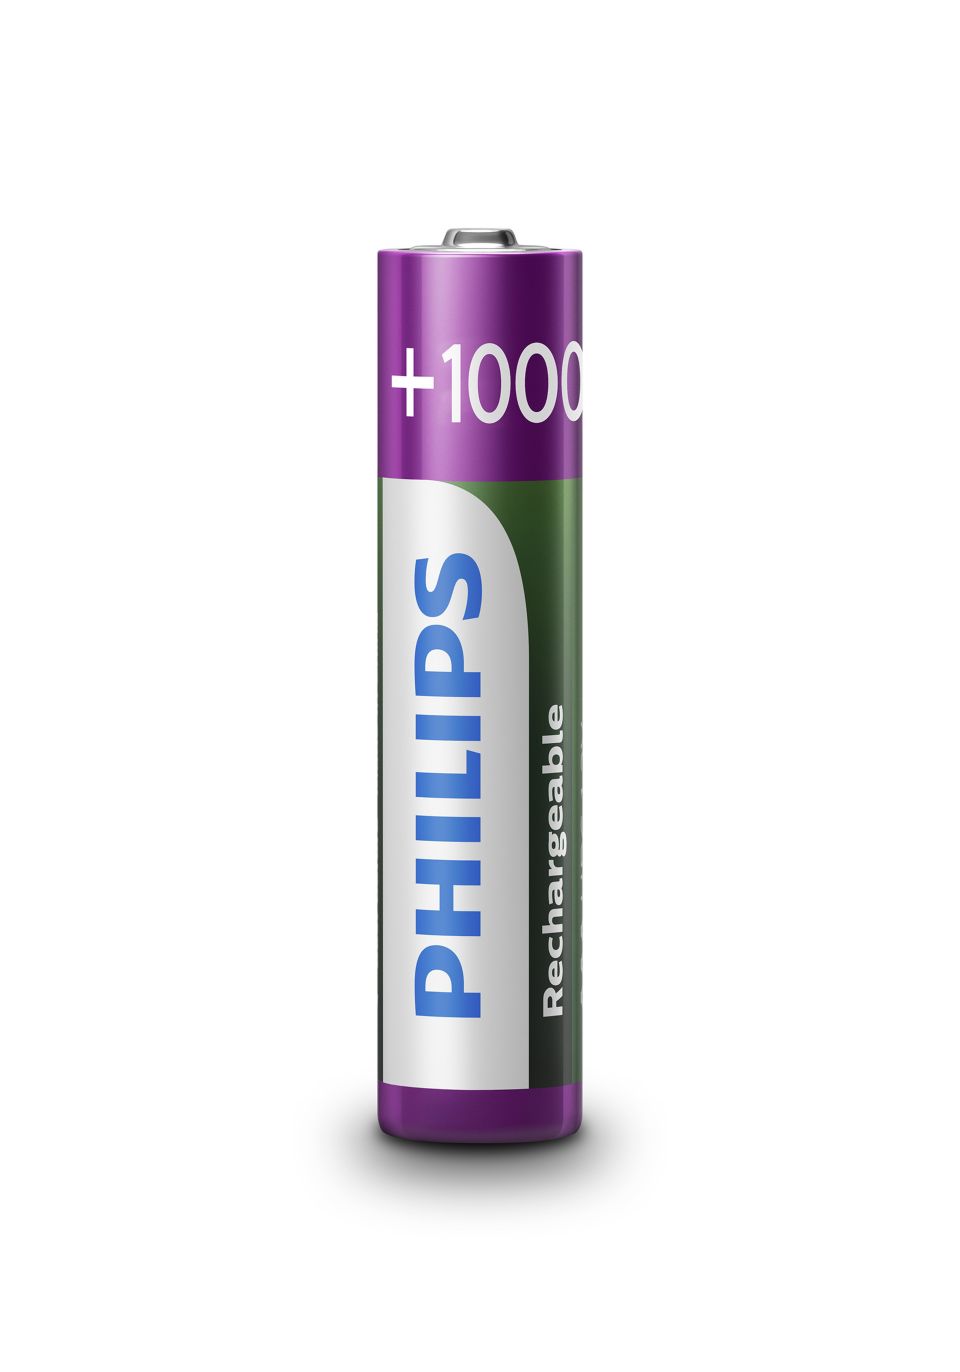 Rechargeables Rechargeable Accu R03b2a100 97 Philips